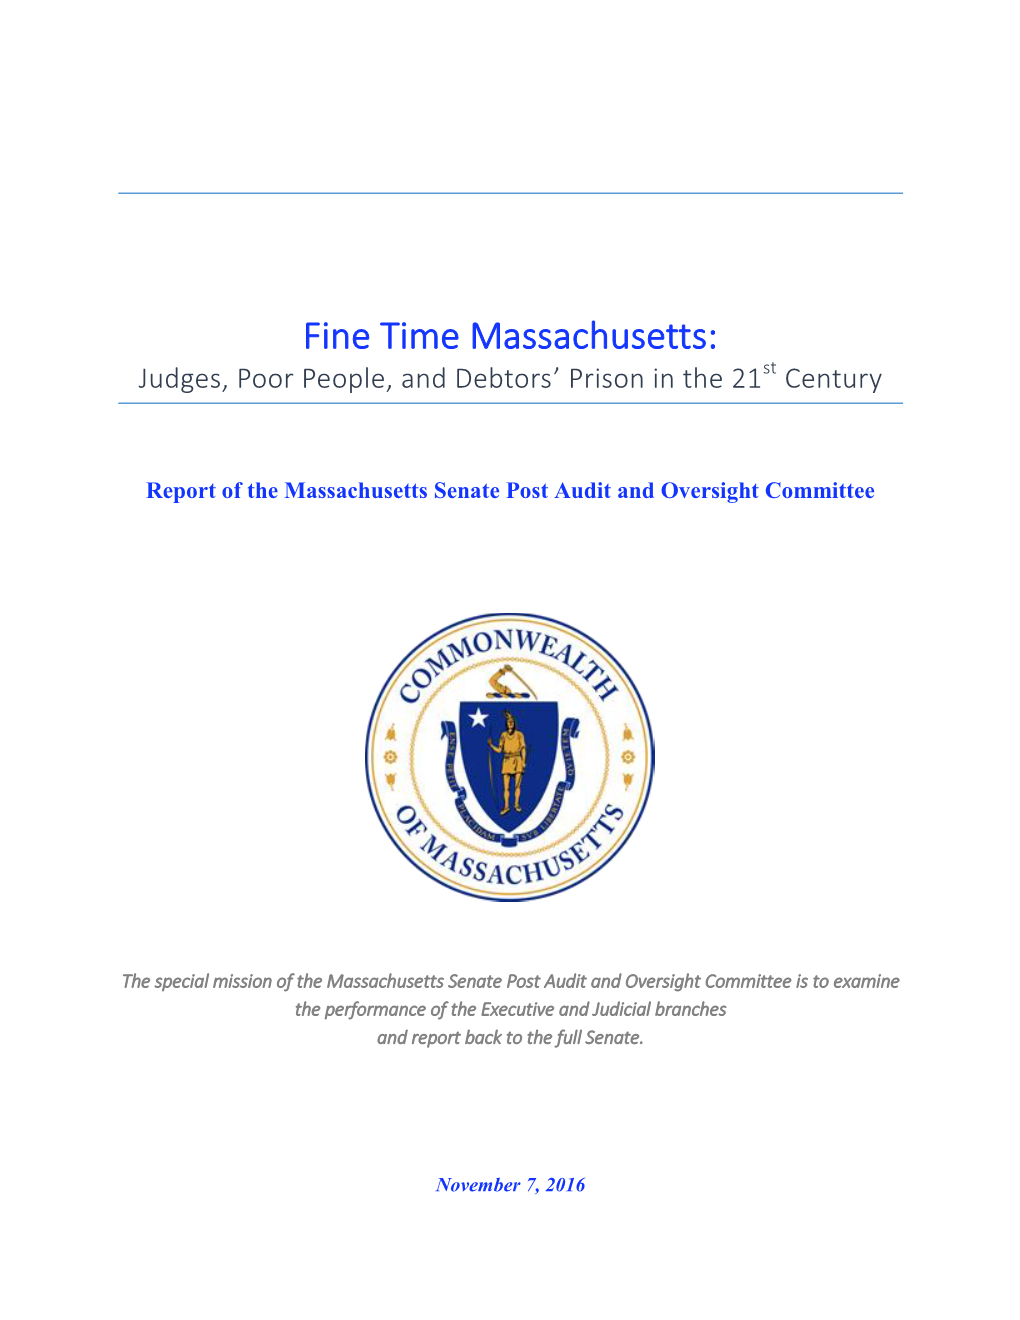 Fine Time Massachusetts: Judges, Poor People, and Debtors’ Prison in the 21St Century